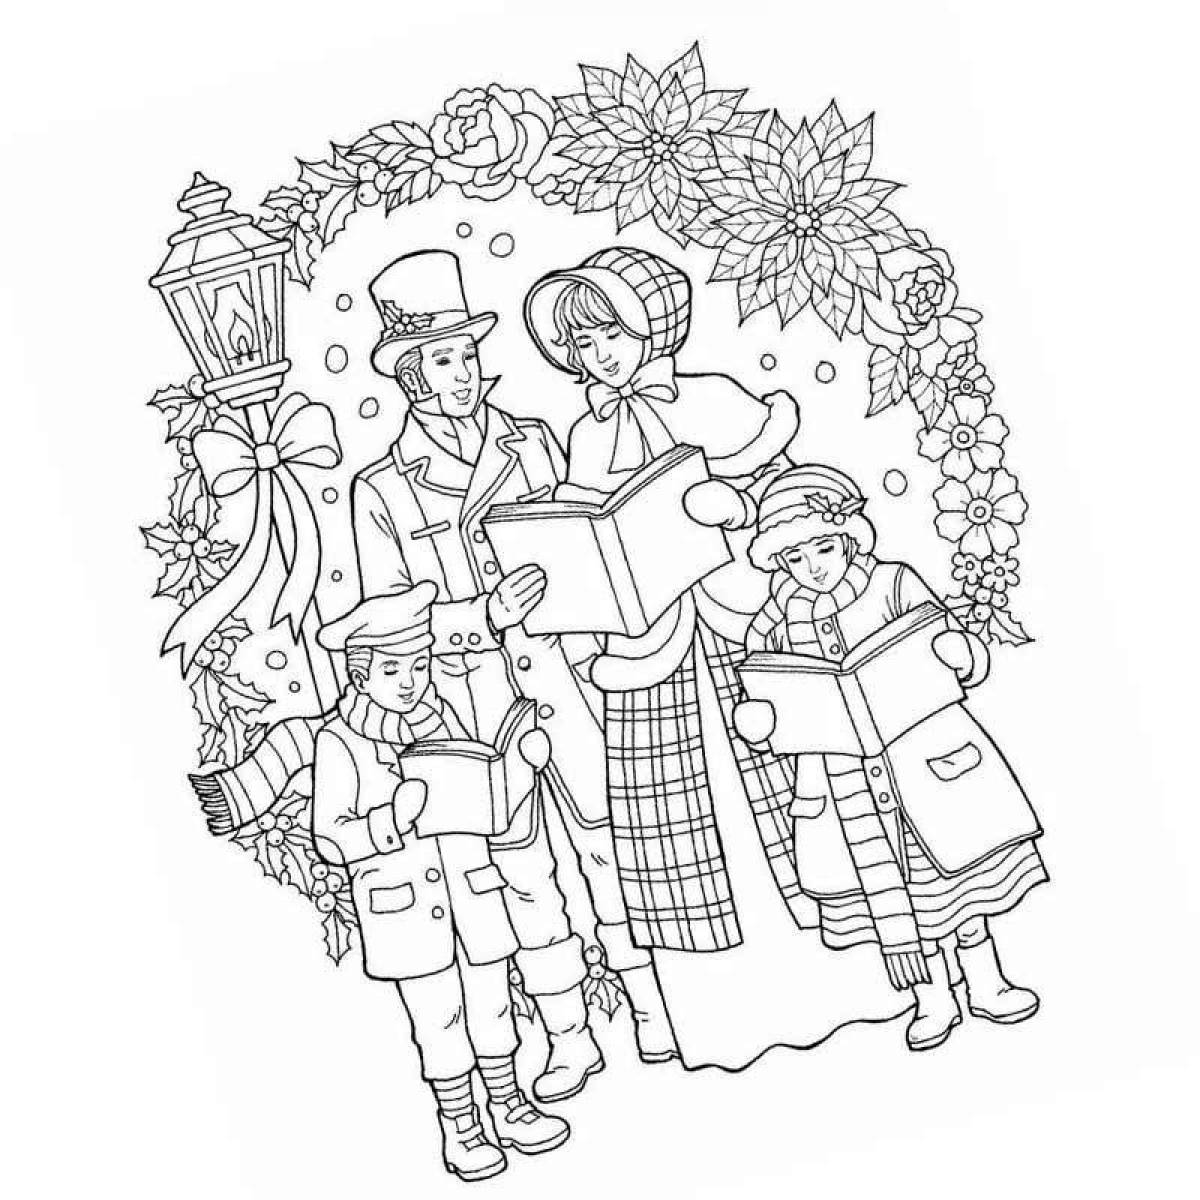 Amazing carol coloring pages